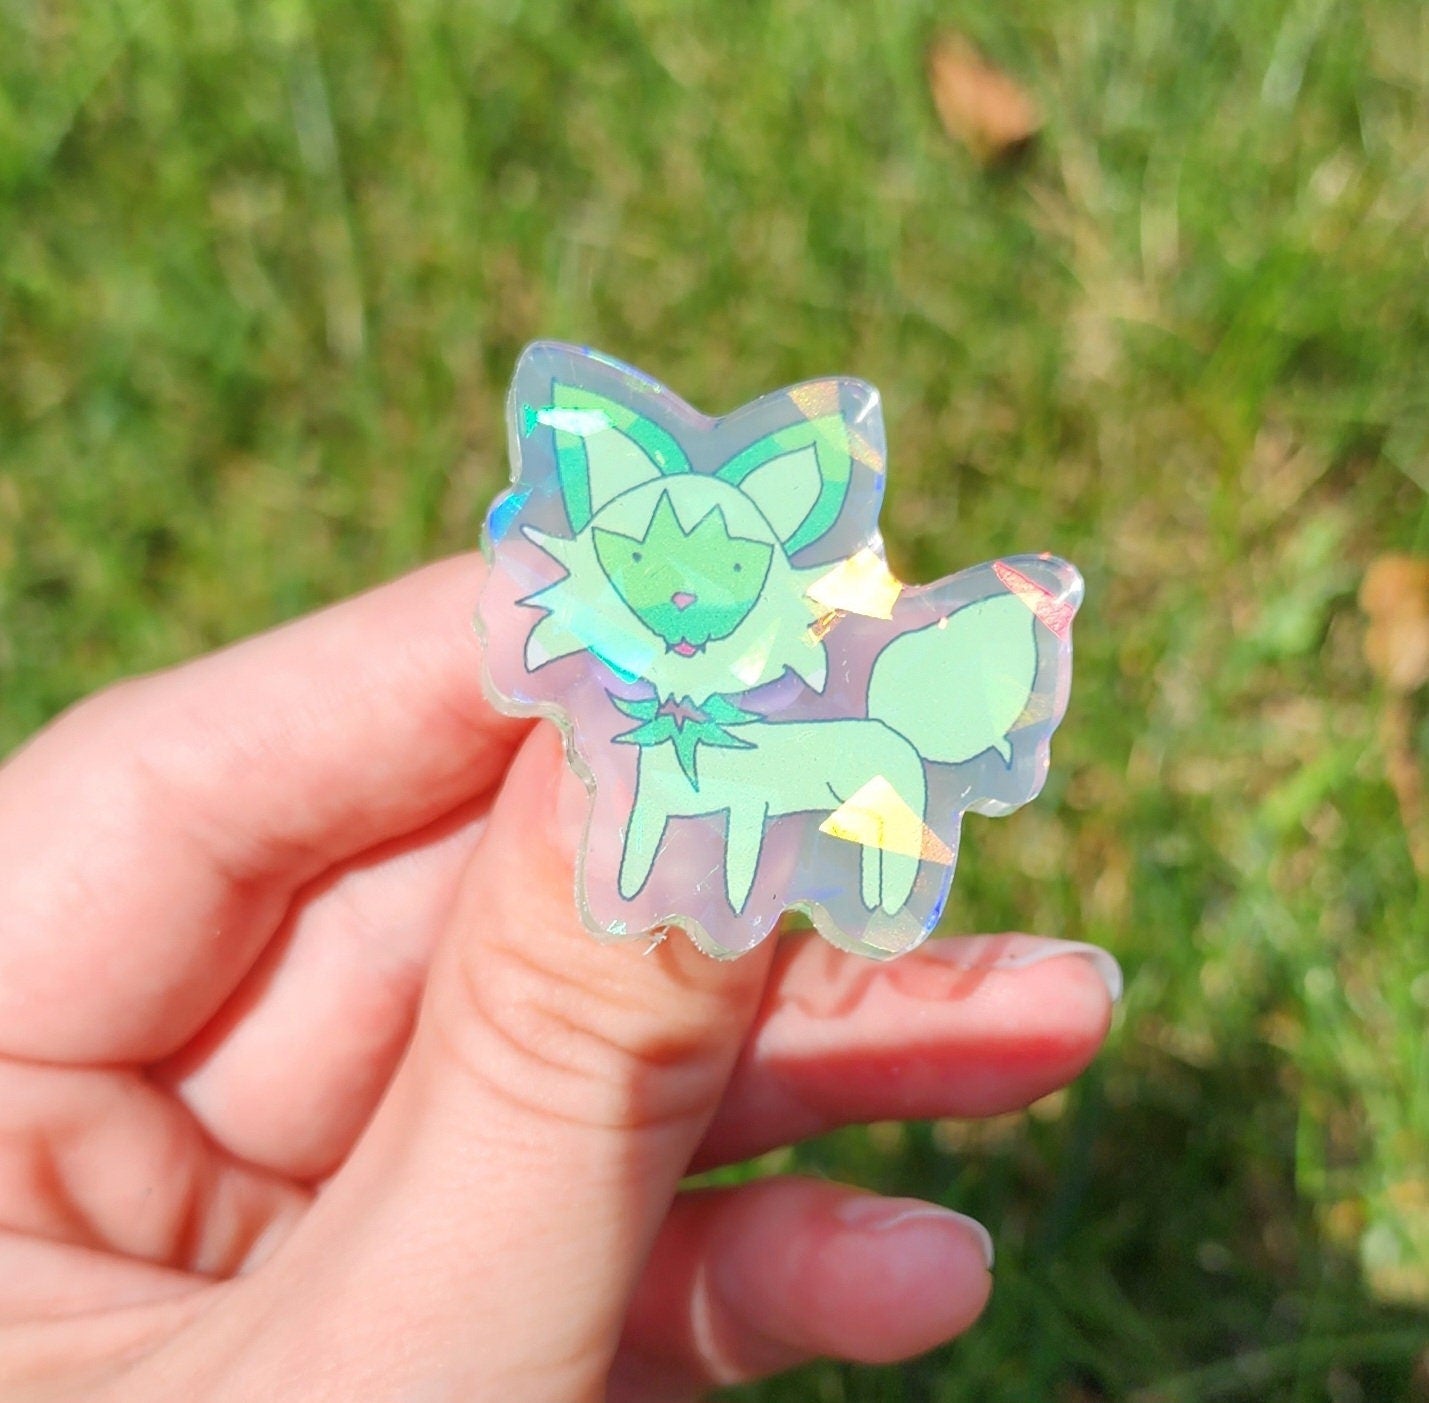 Snack Wrap Grass Type Friend Acrylic 1.5 inch Pin, Grass Type Acrylic Pin, Gamer Gift, Video Game Pin, Witchy Aesthetic, Cute Grass Type